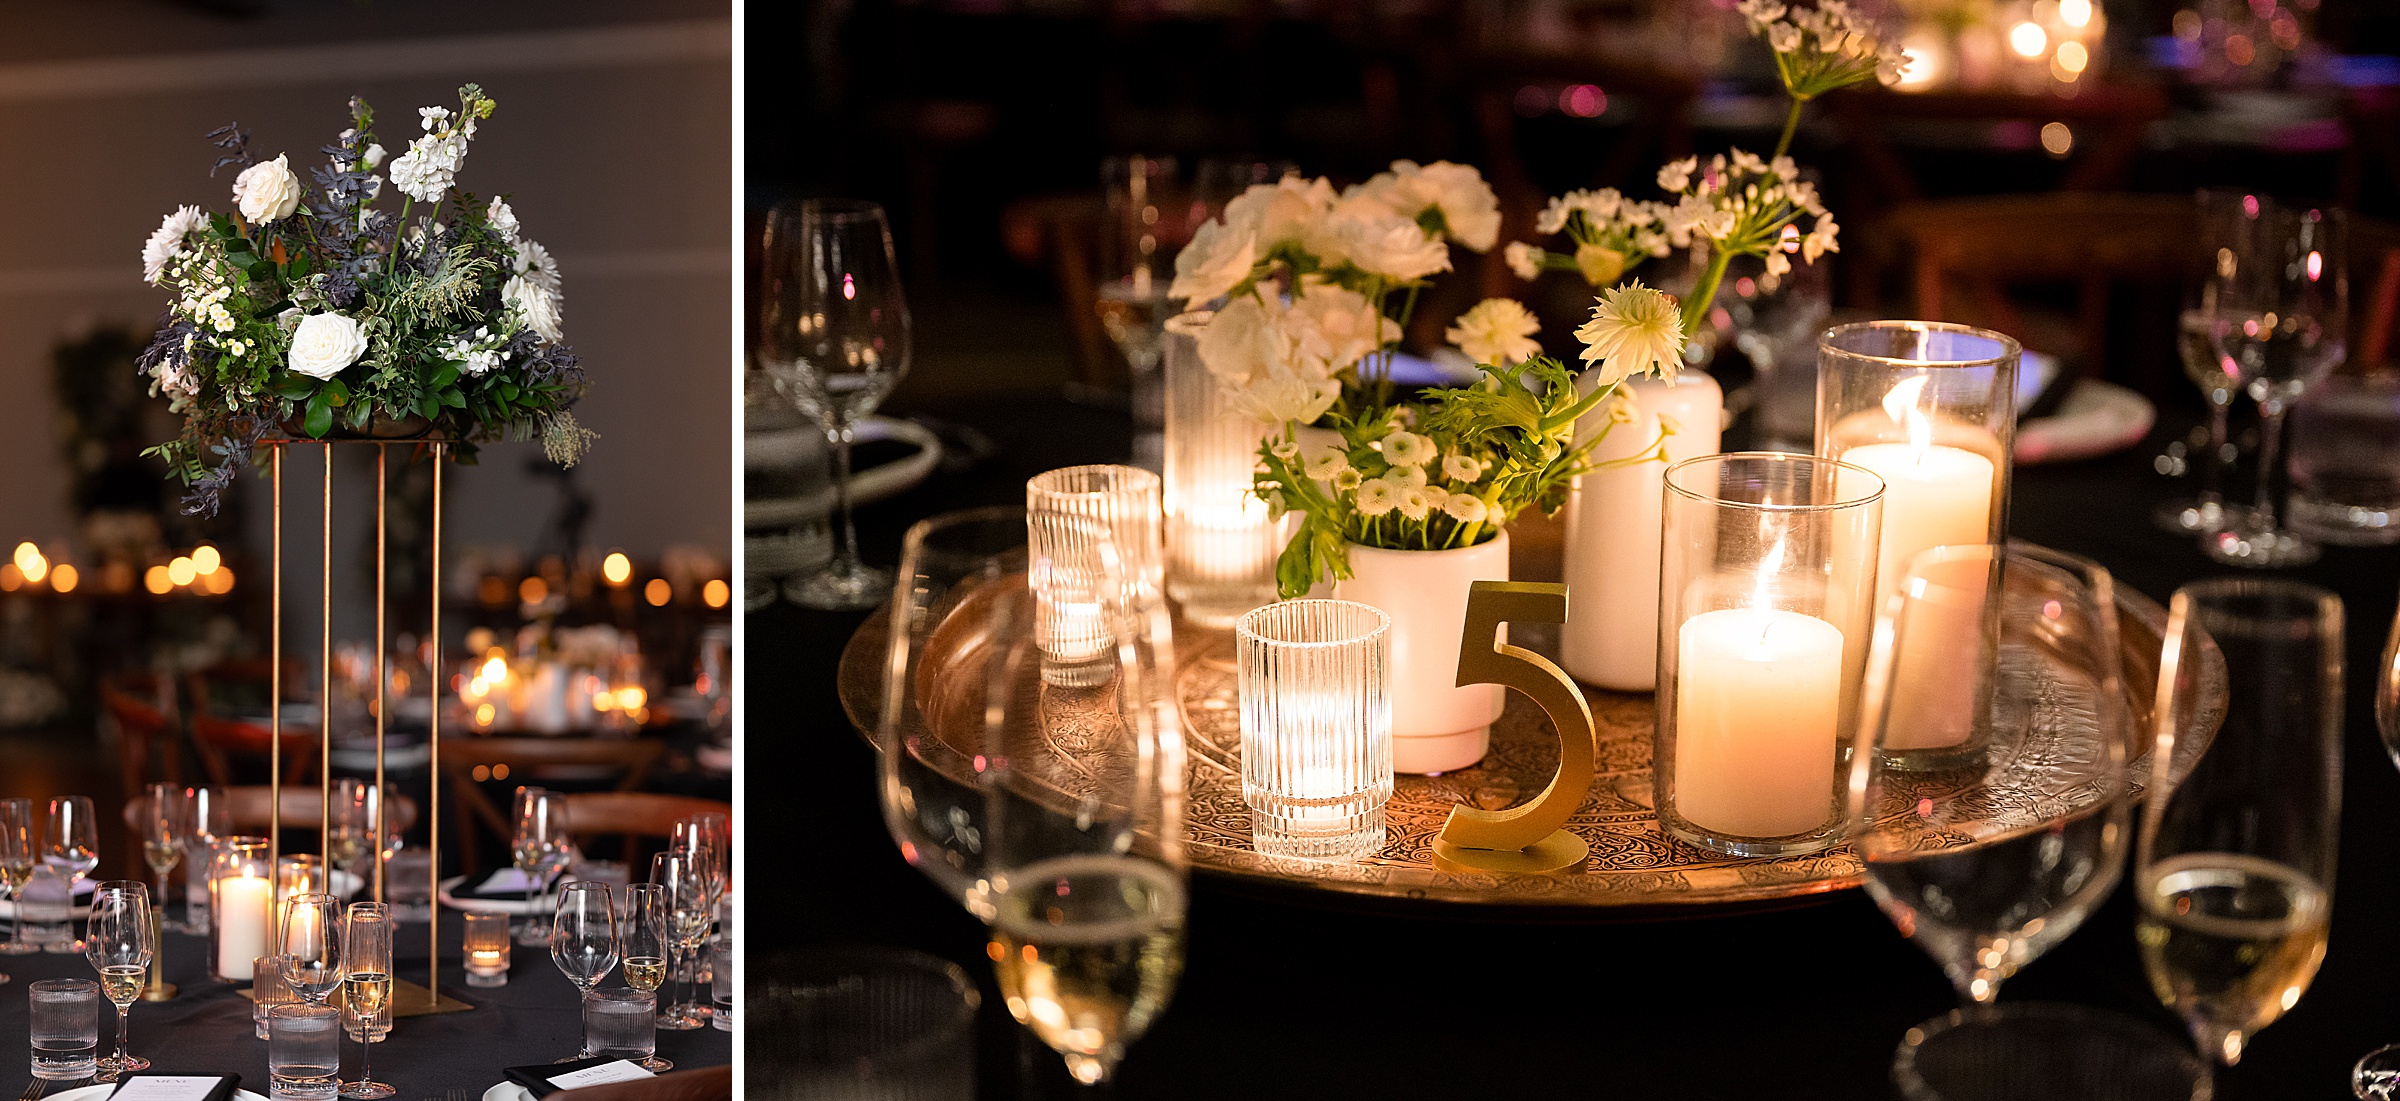 Two stunning pictures from a Lilah Events wedding reception, showcasing elegant candles and beautiful flowers.